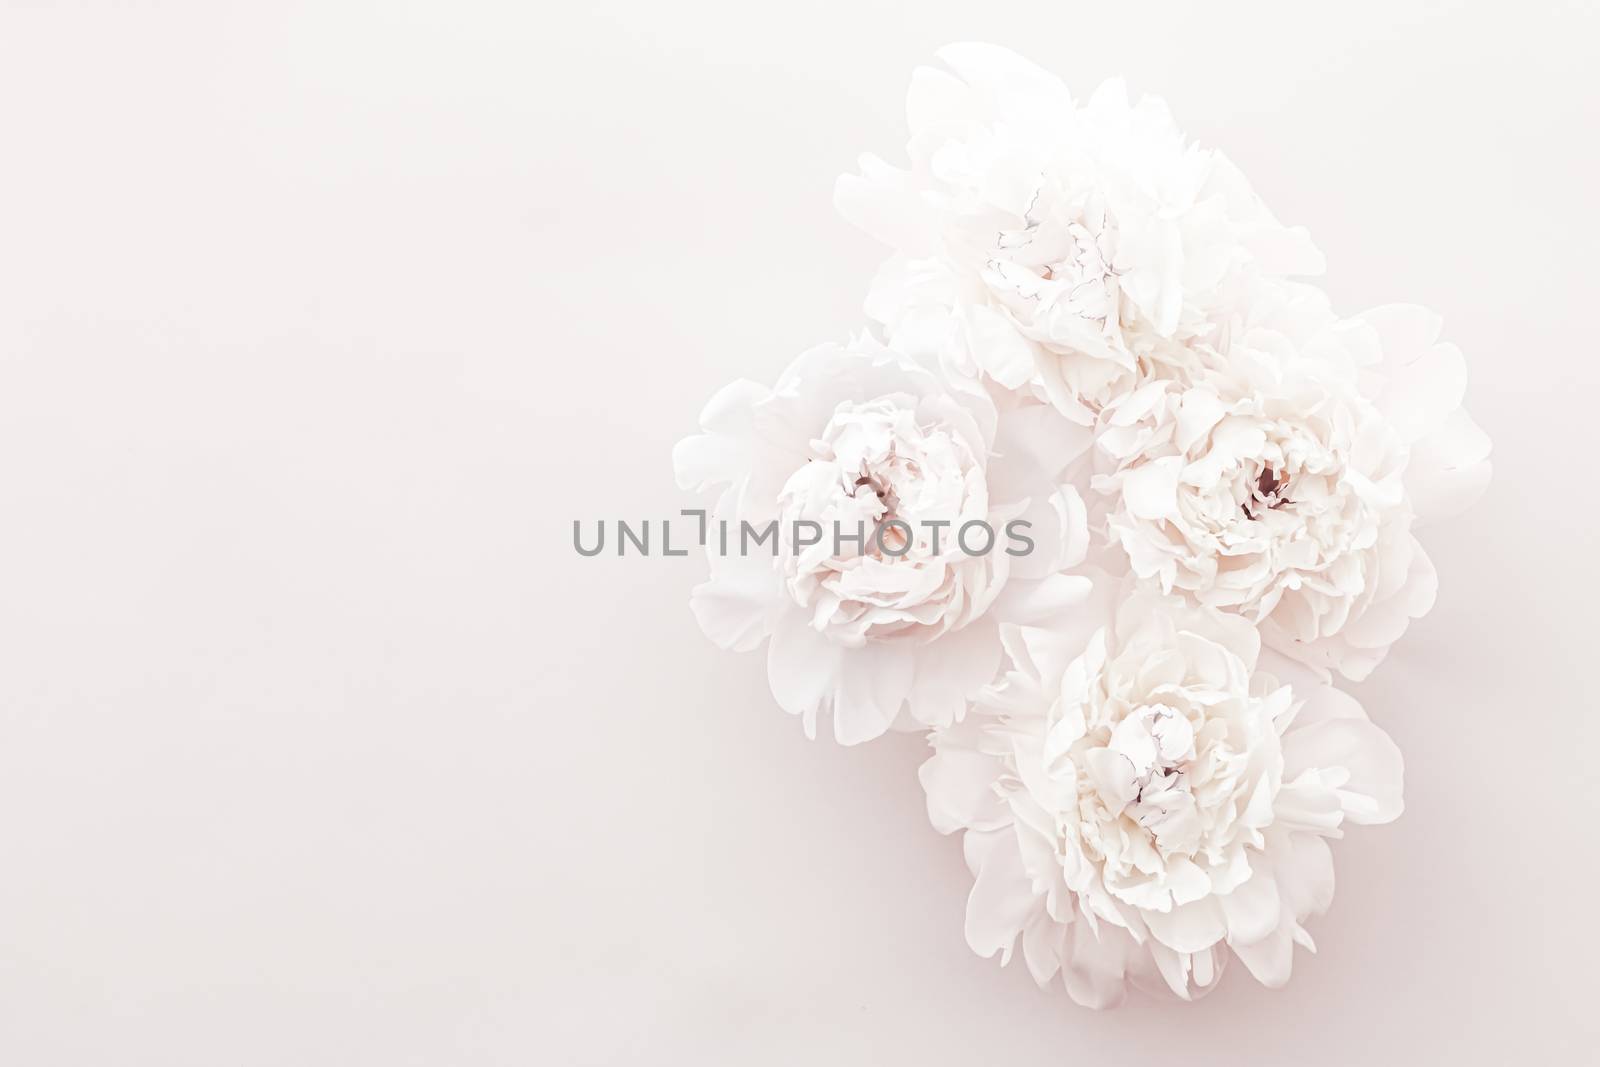 Pastel peony flowers in bloom as floral art background, wedding decor and luxury branding design